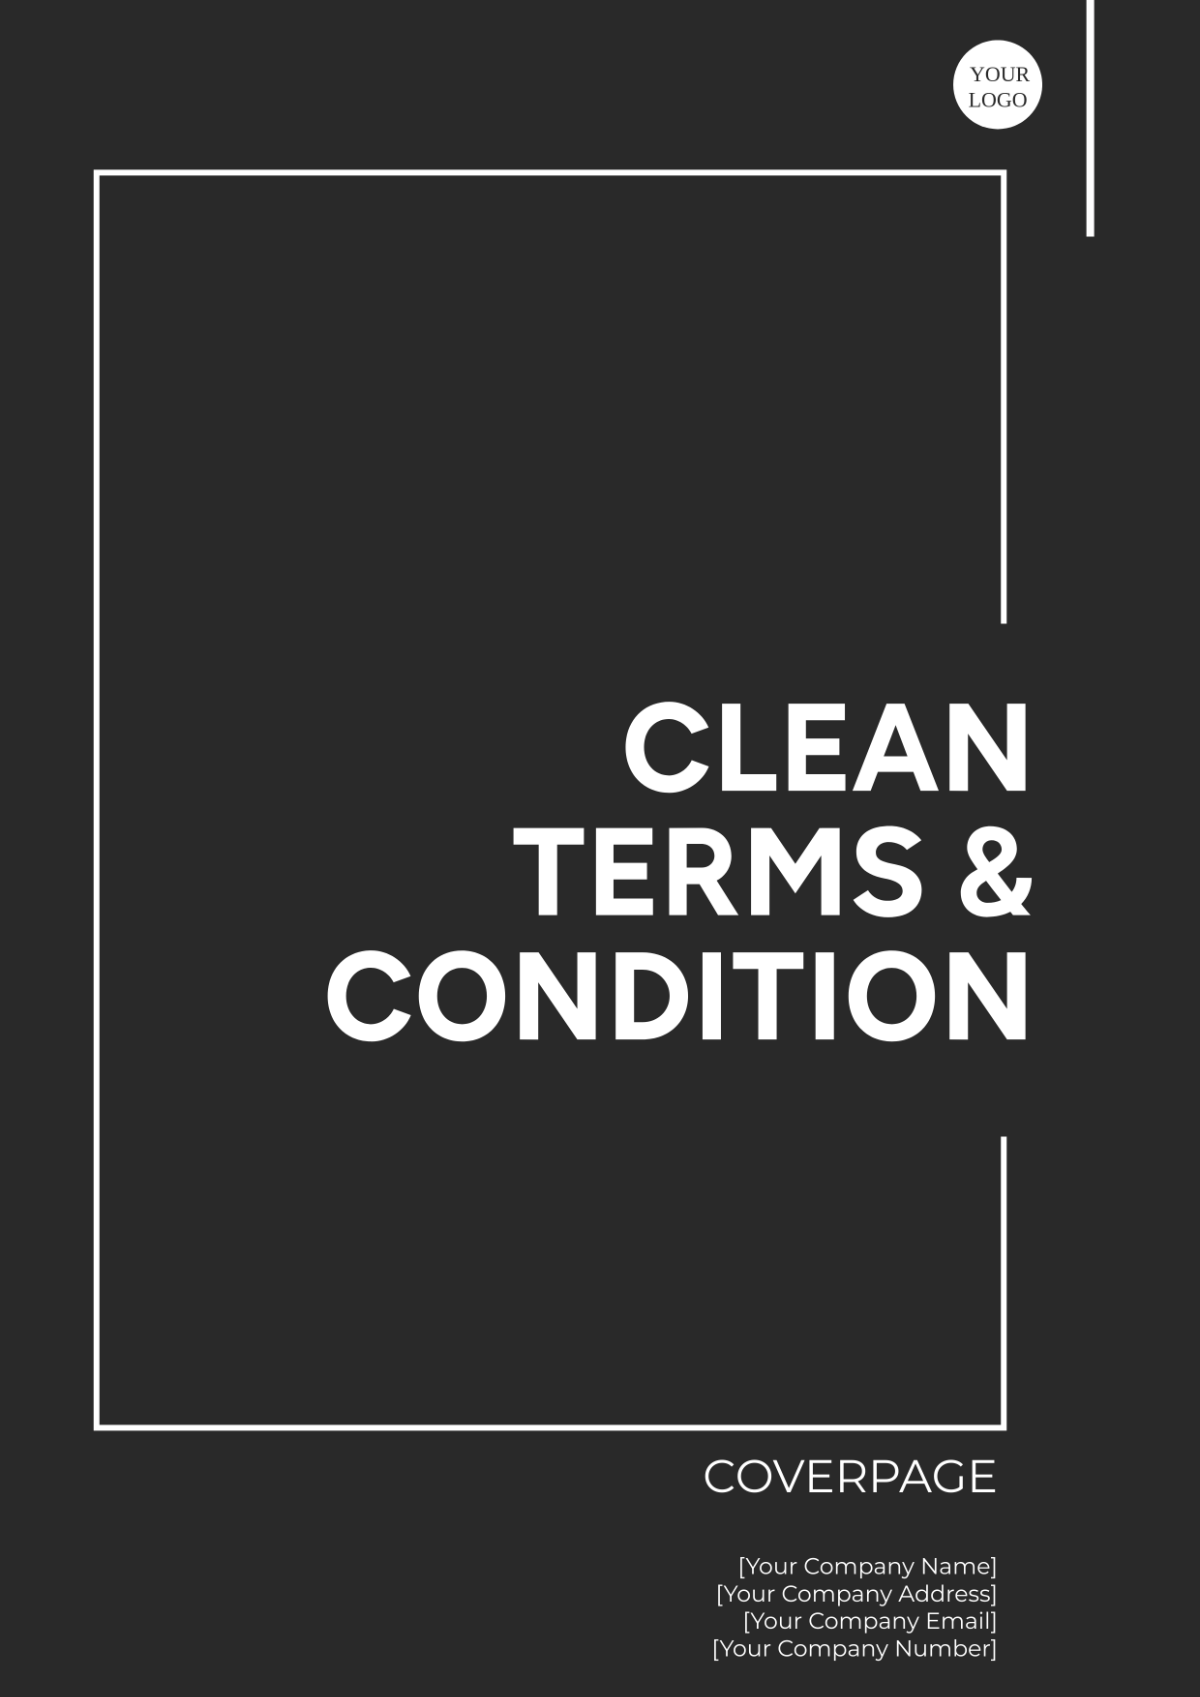 Clean Terms and Conditions Cover Page